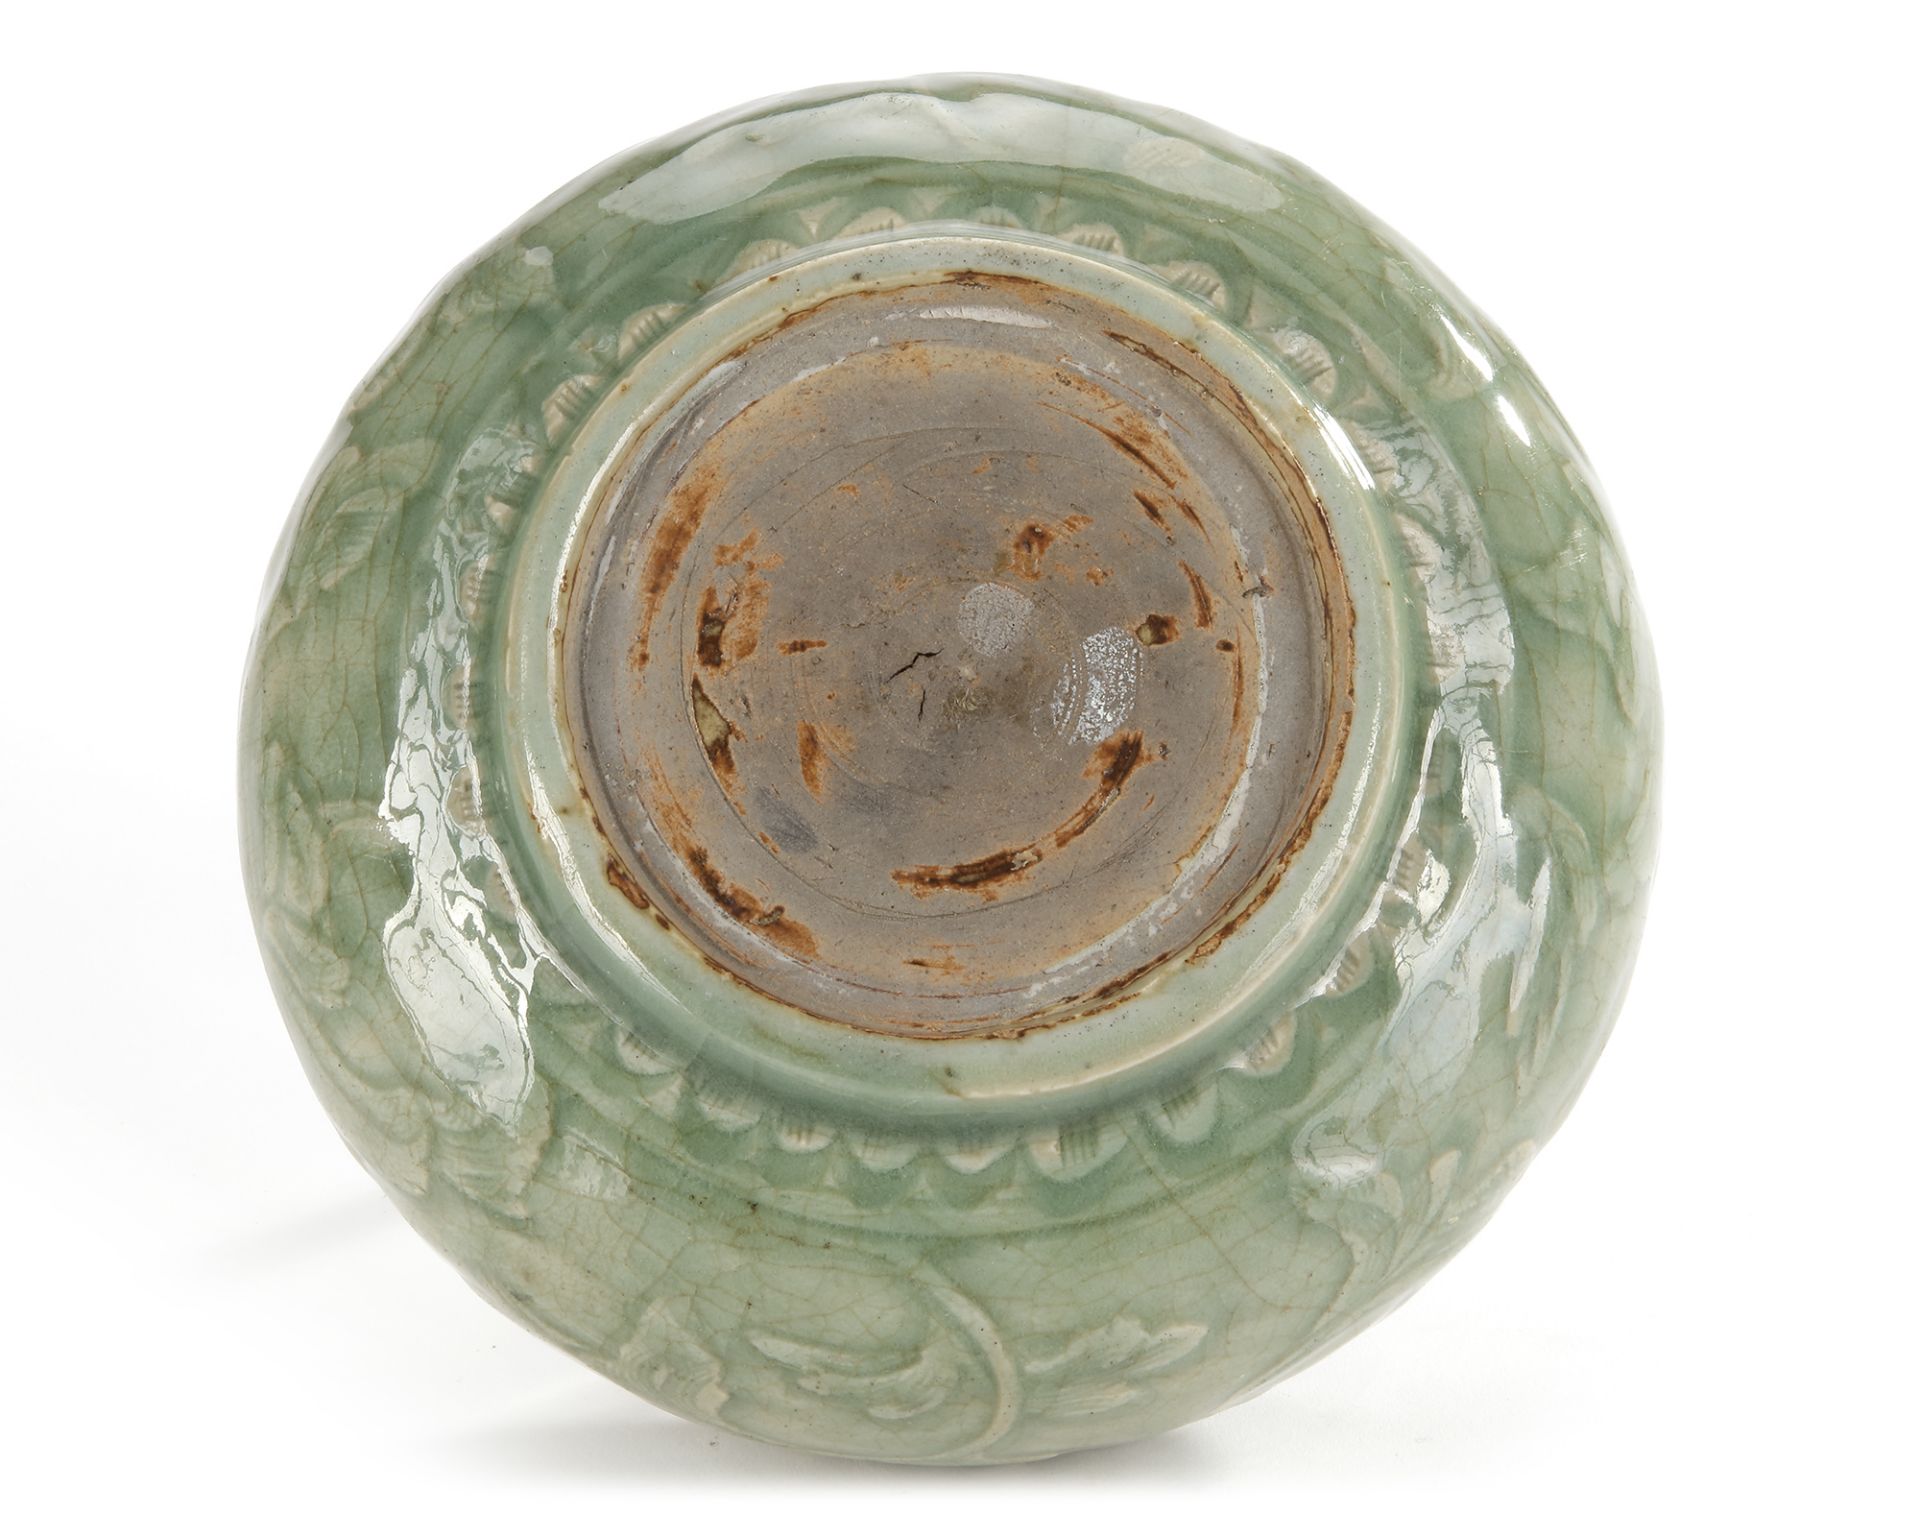 A CHINESE LONGQUAN CELADON BOWL, MING DYNASTY, 15TH CENTURY - Image 4 of 4